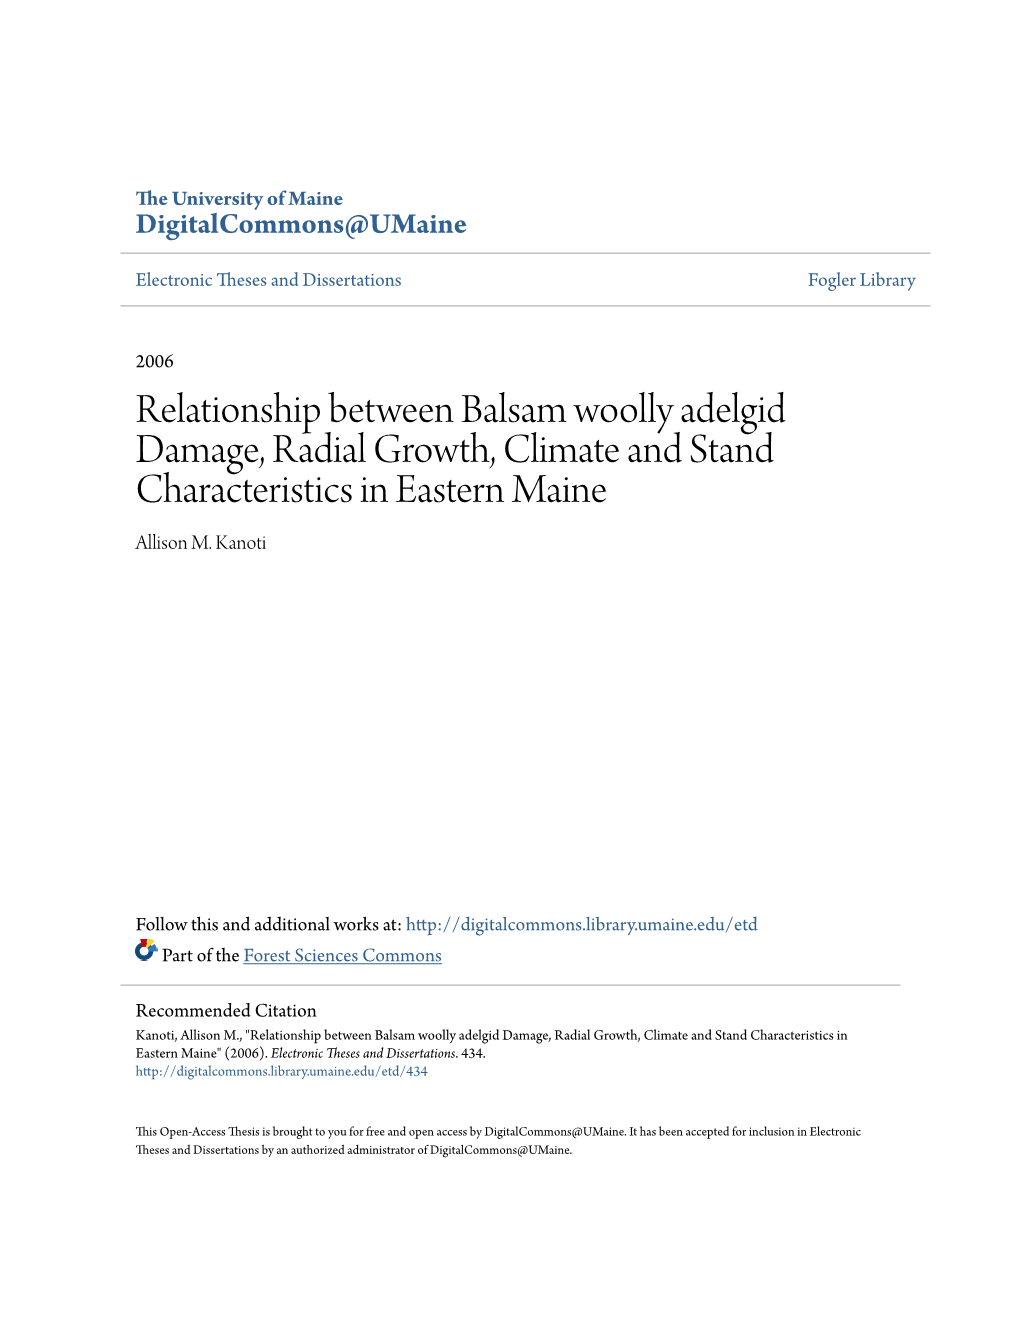 Relationship Between Balsam Woolly Adelgid Damage, Radial Growth, Climate and Stand Characteristics in Eastern Maine Allison M